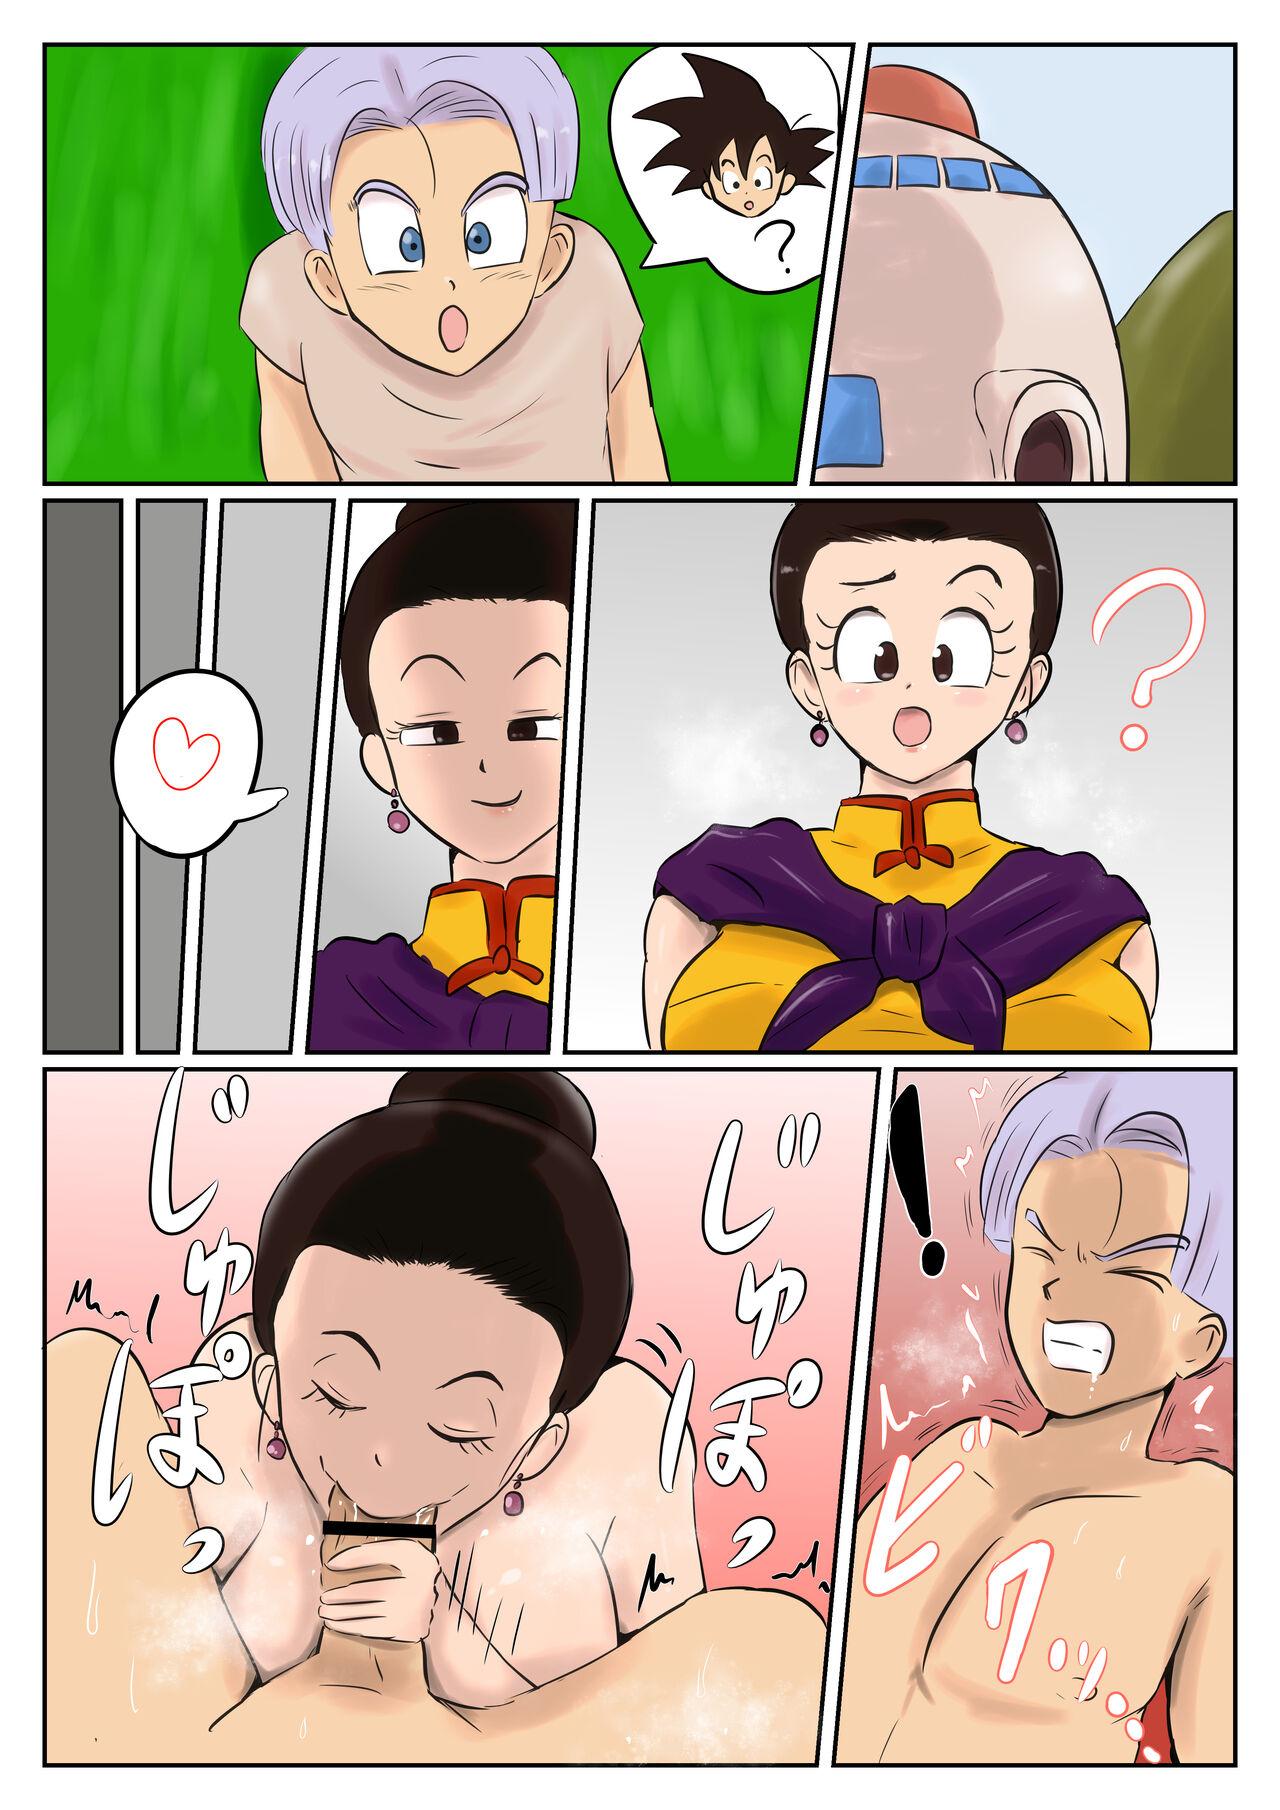 Amateurs Trunks x Chichi - Dragon ball z Tall - Page 1